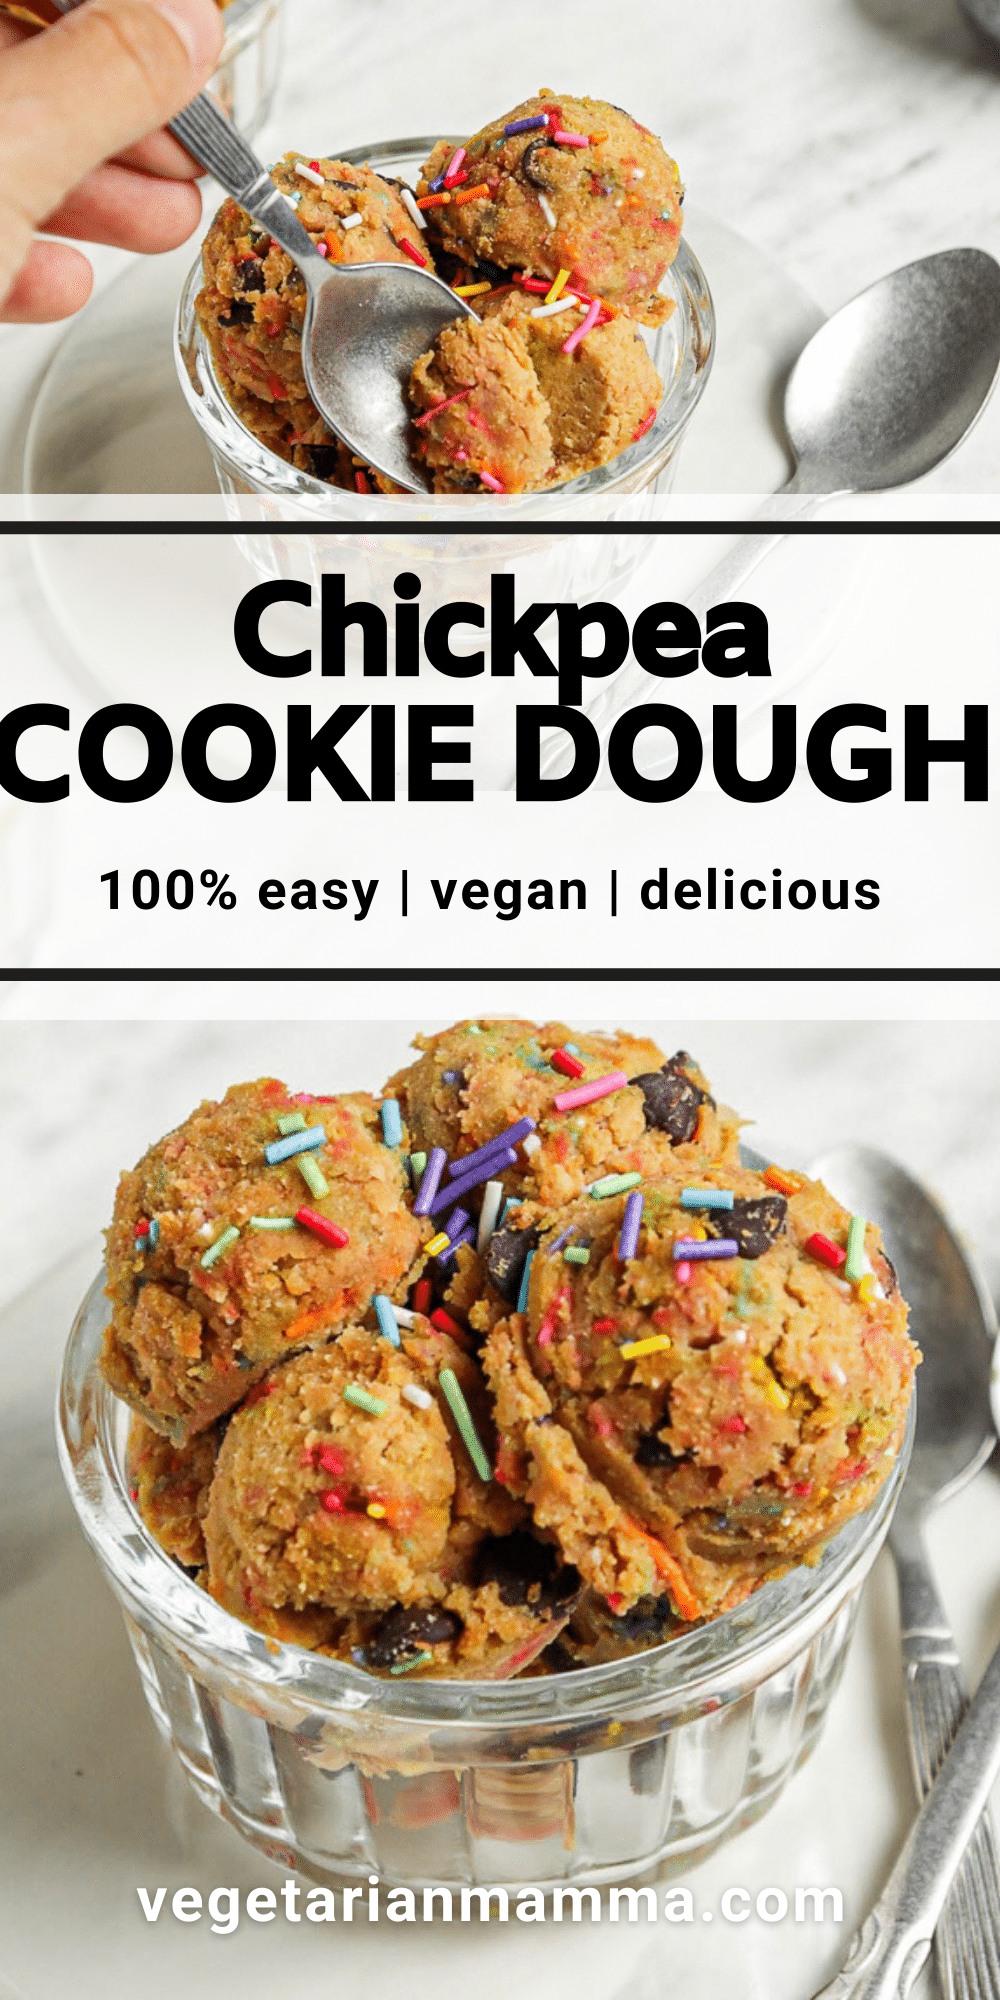 Chickpea Cookie Dough is a sweet treat that is ready in minutes with no need to bake! You only need a handful of ingredients to make this deliciously smooth and creamy gluten-free edible cookie dough.